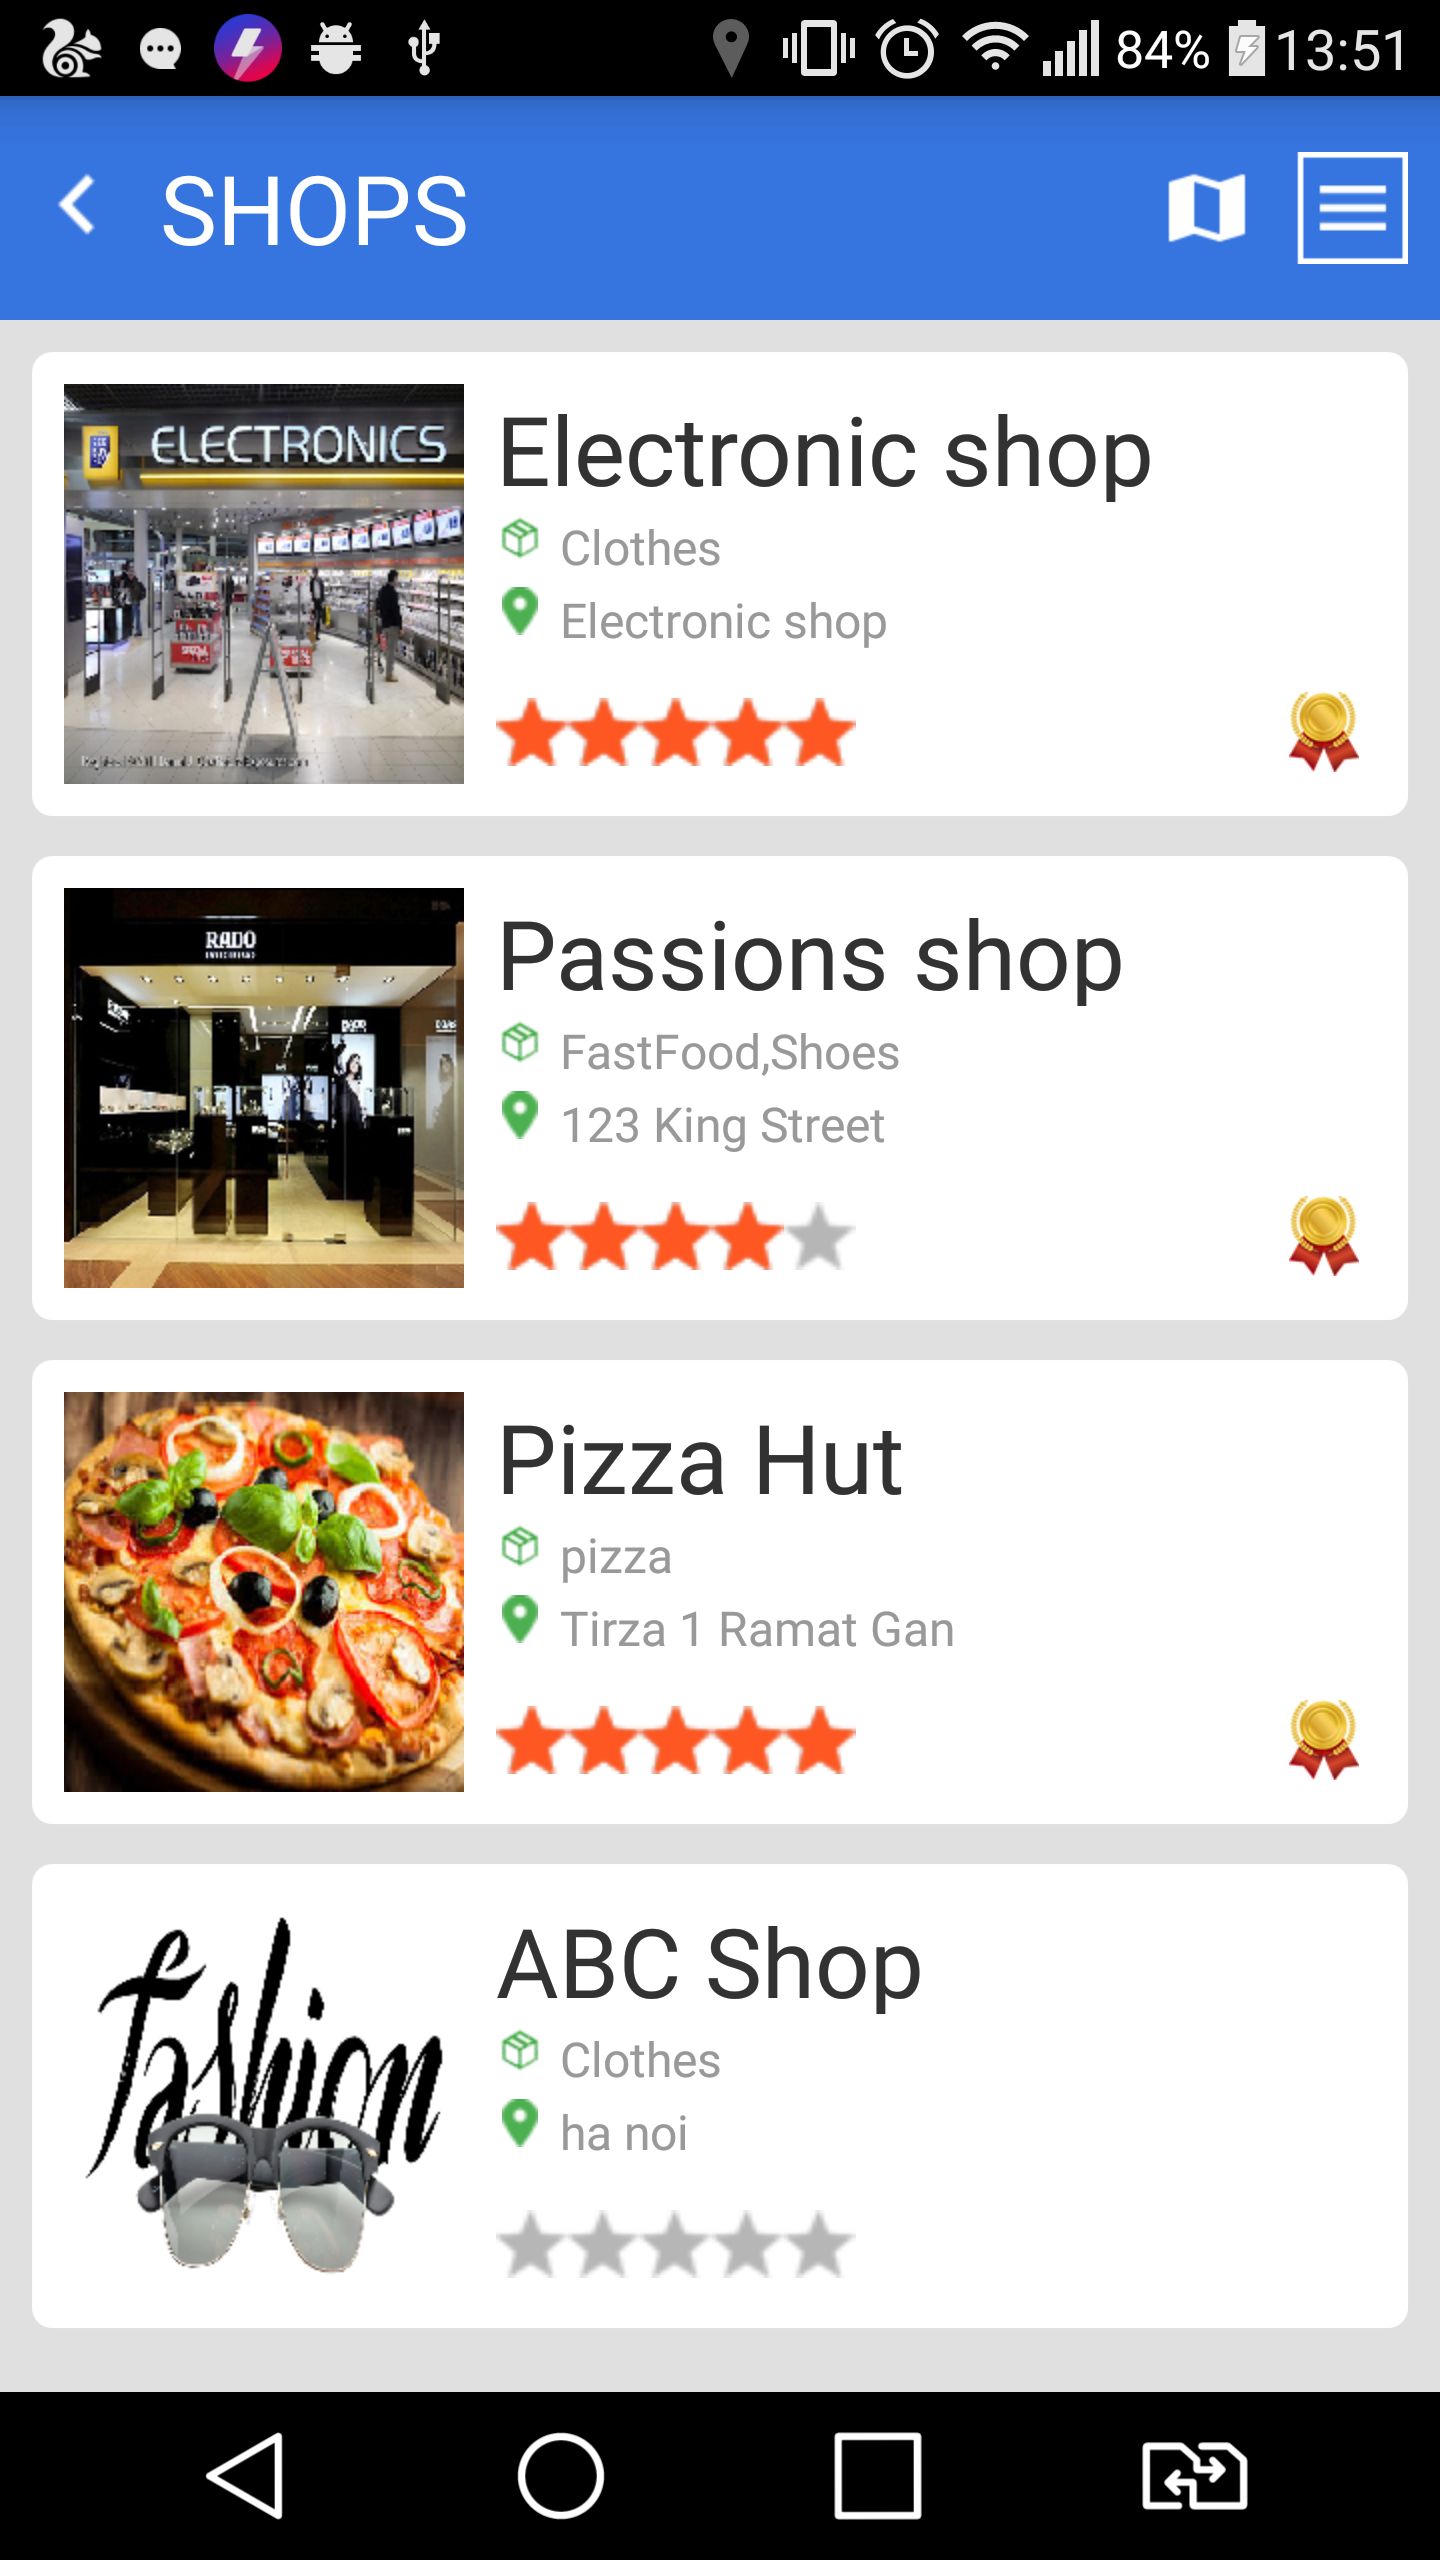 marketplace-android-app-template-by-hicomsolutions-codester